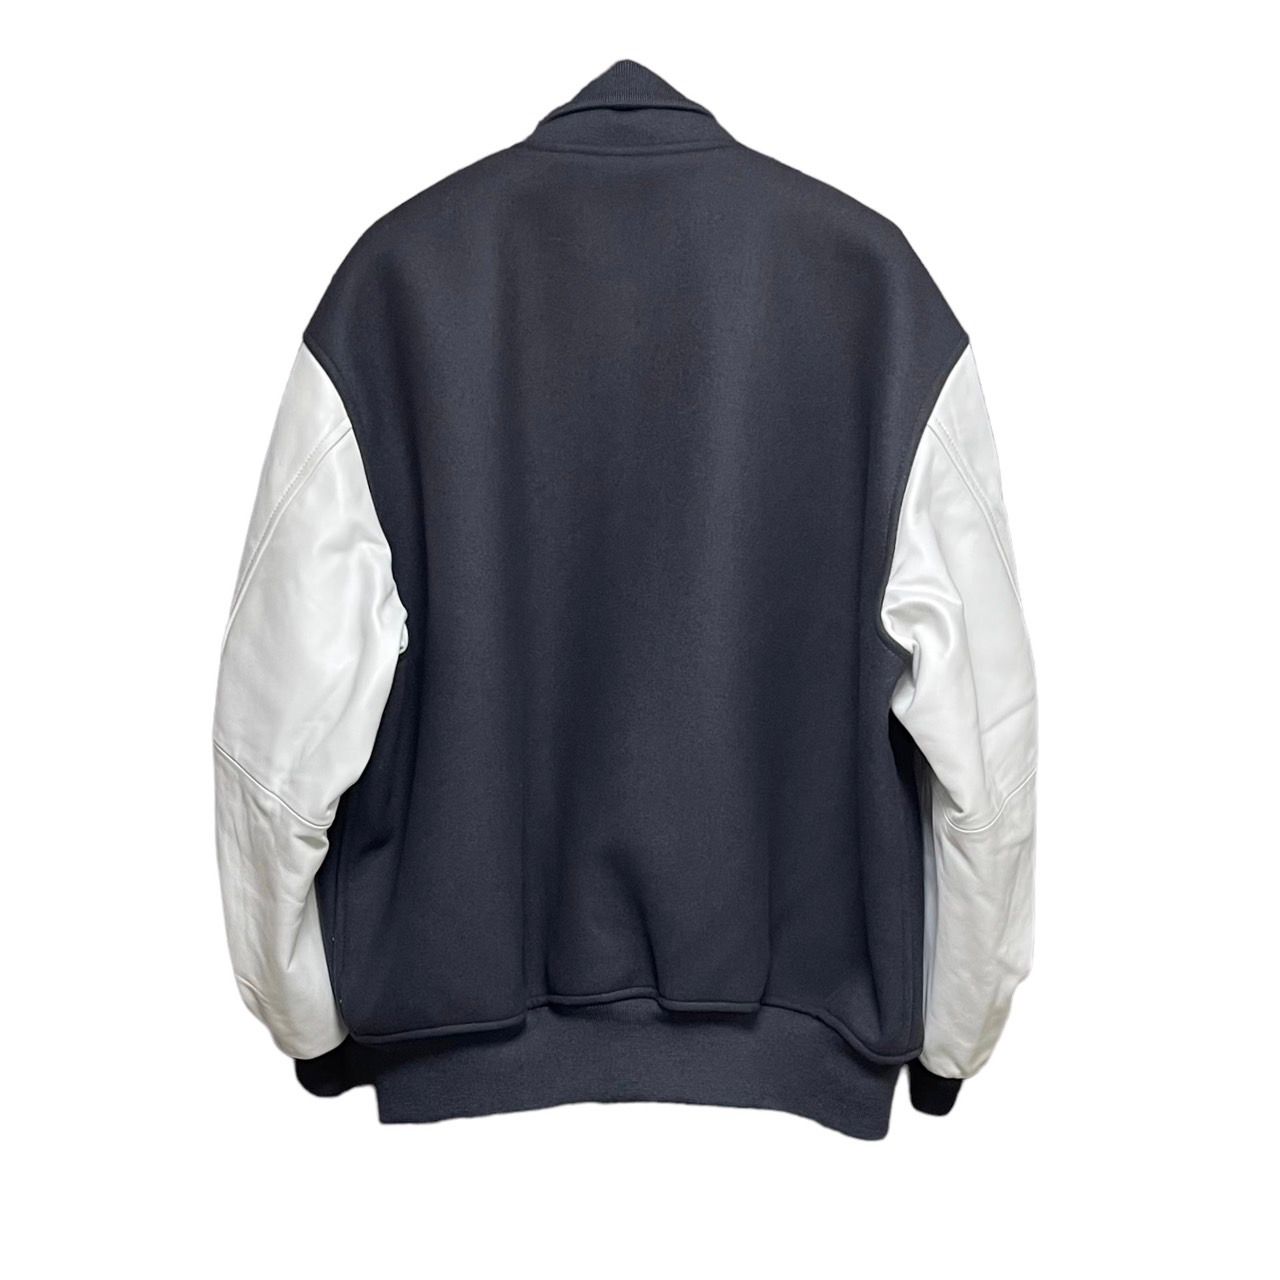 Graphpaper グラフペーパー 21AW Scale Off Melton Stadium Jacket ...